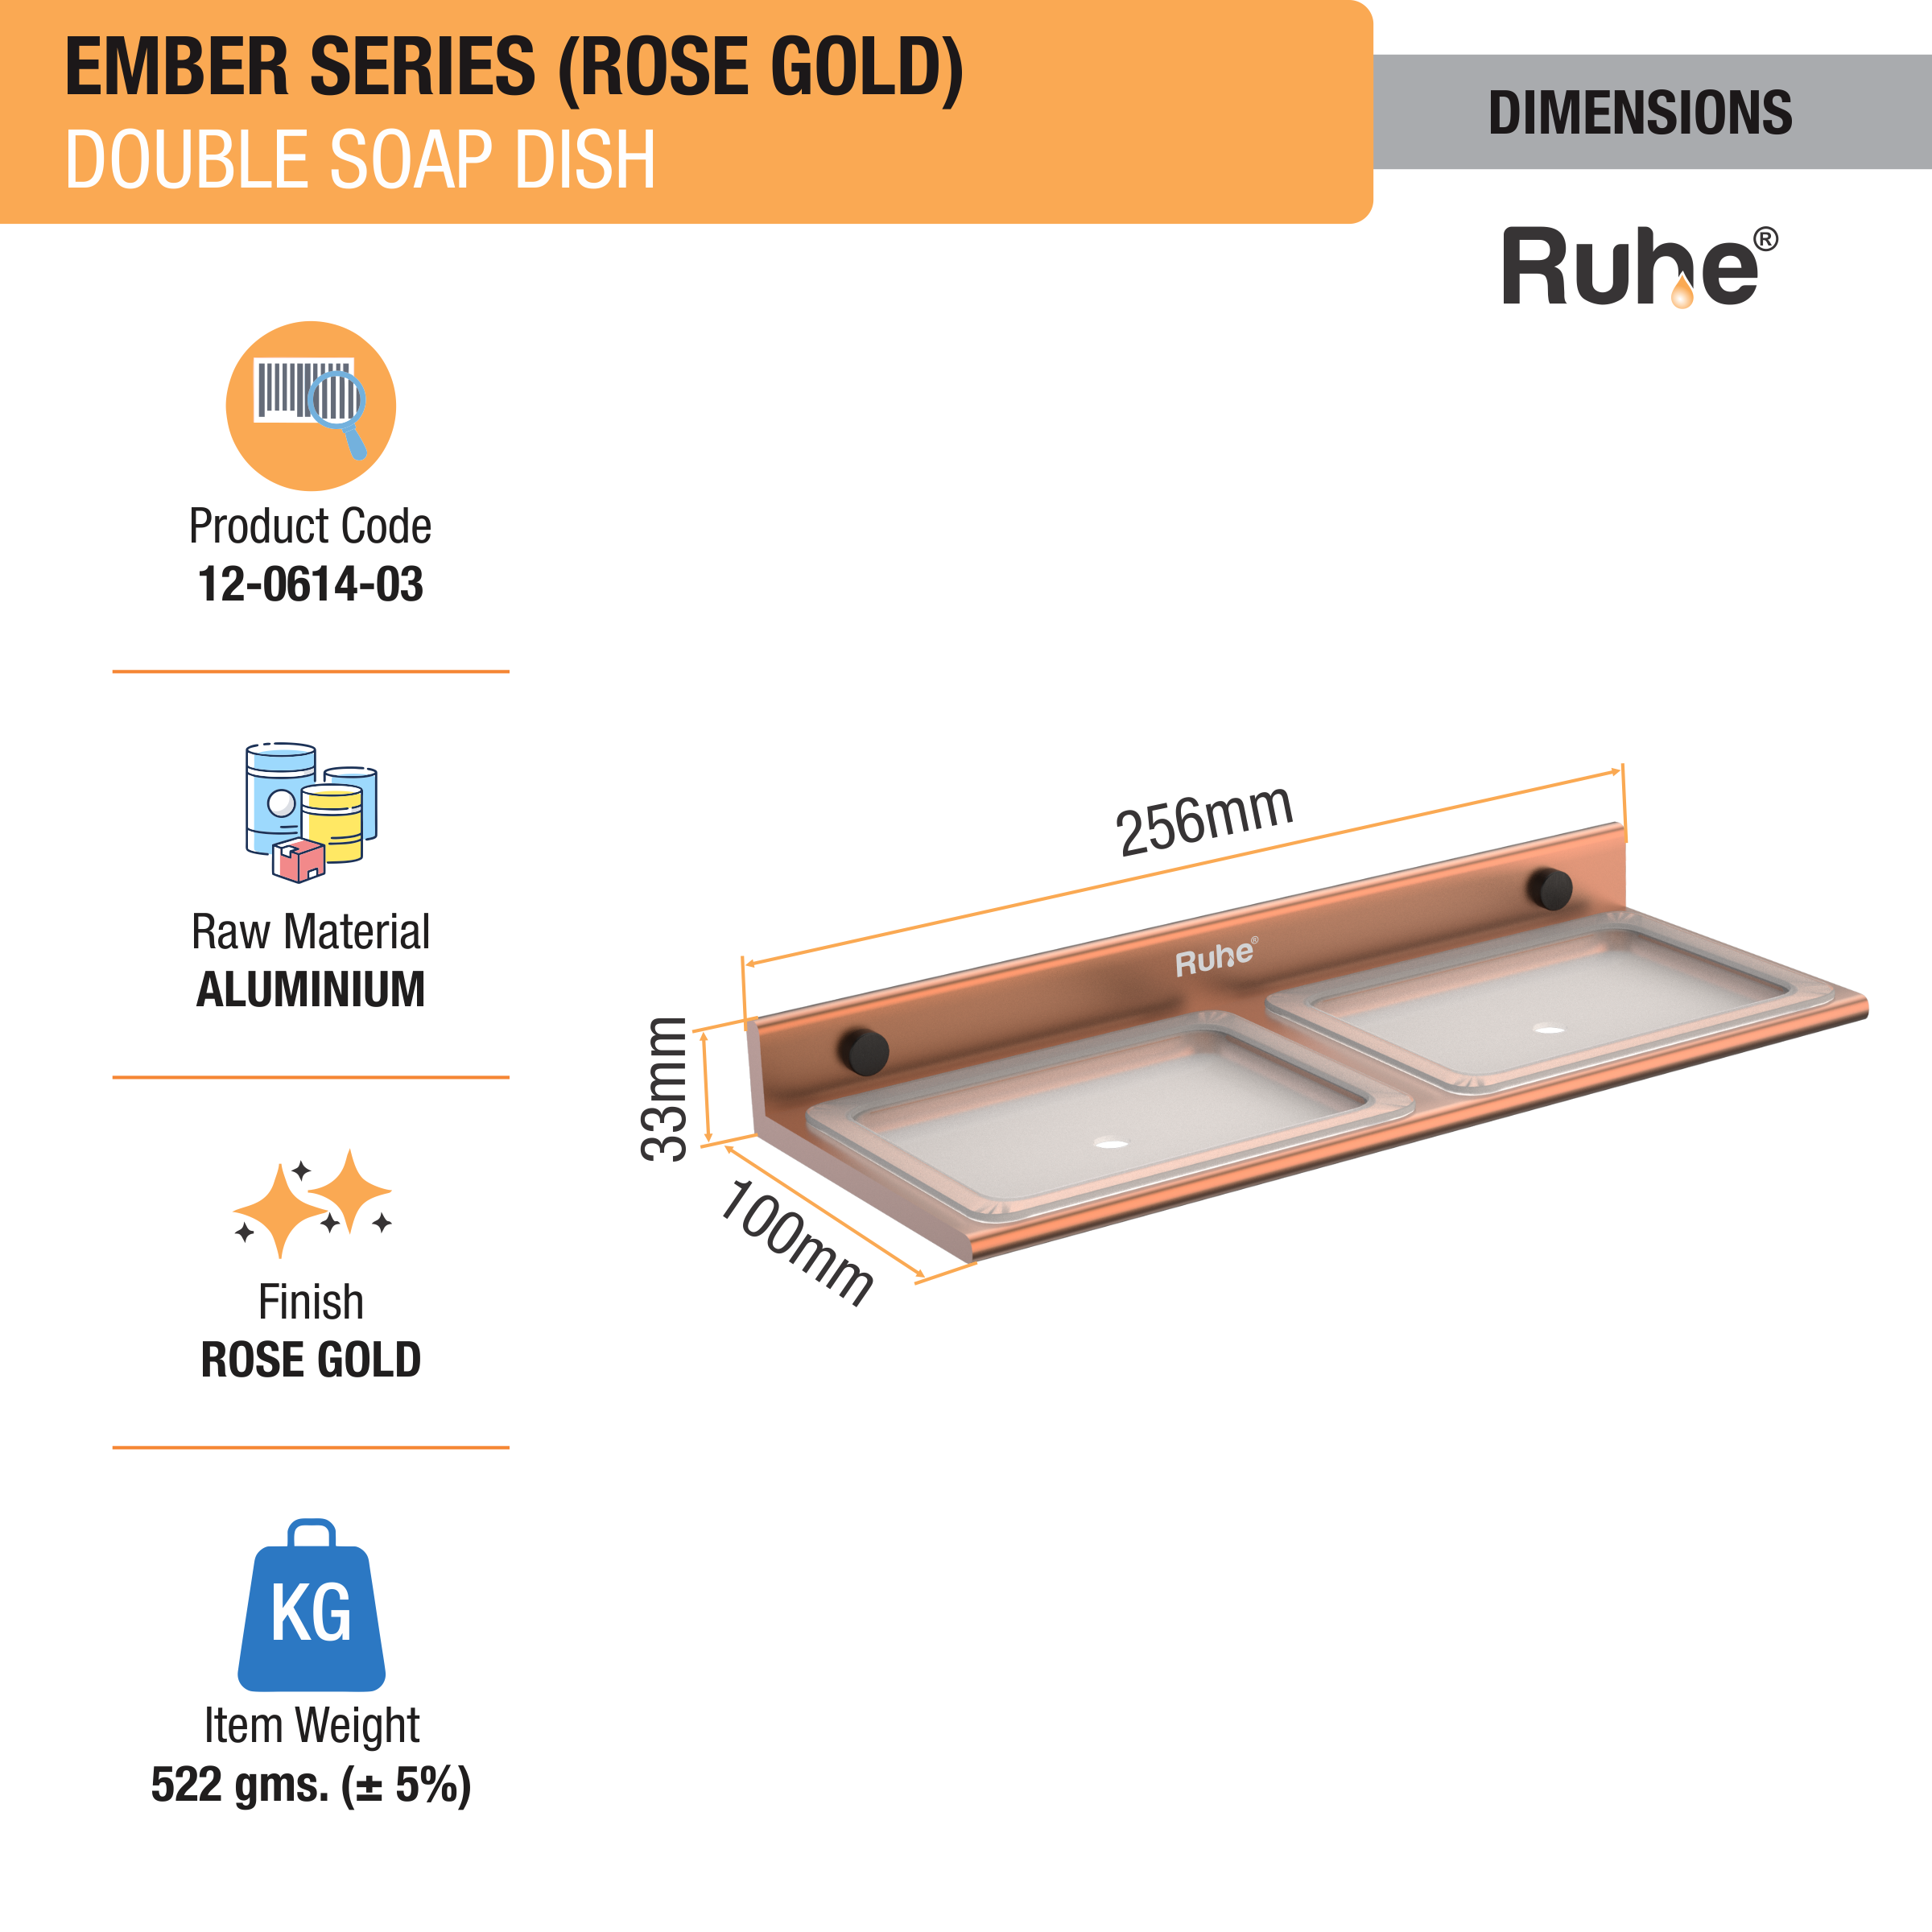 Ember Rose Gold Double Soap Dish (Space Aluminium) dimensions and sizes